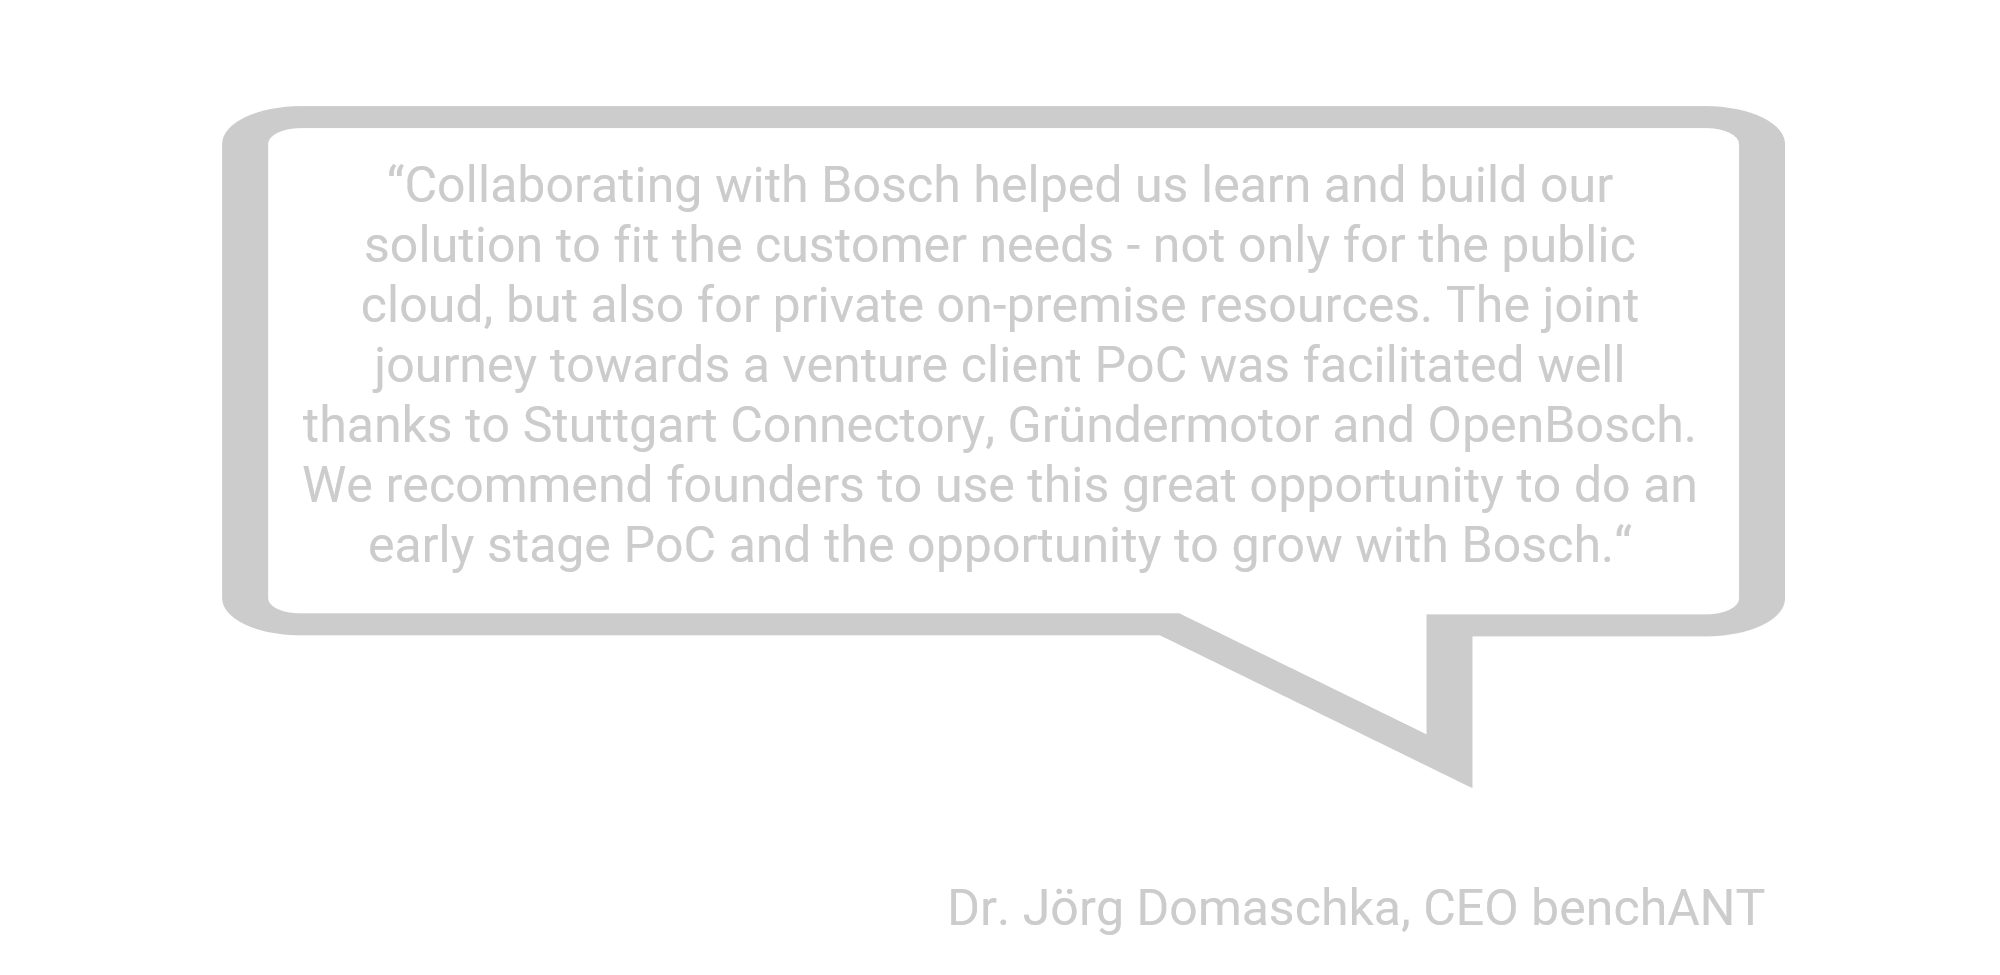 Official statement with Bosch